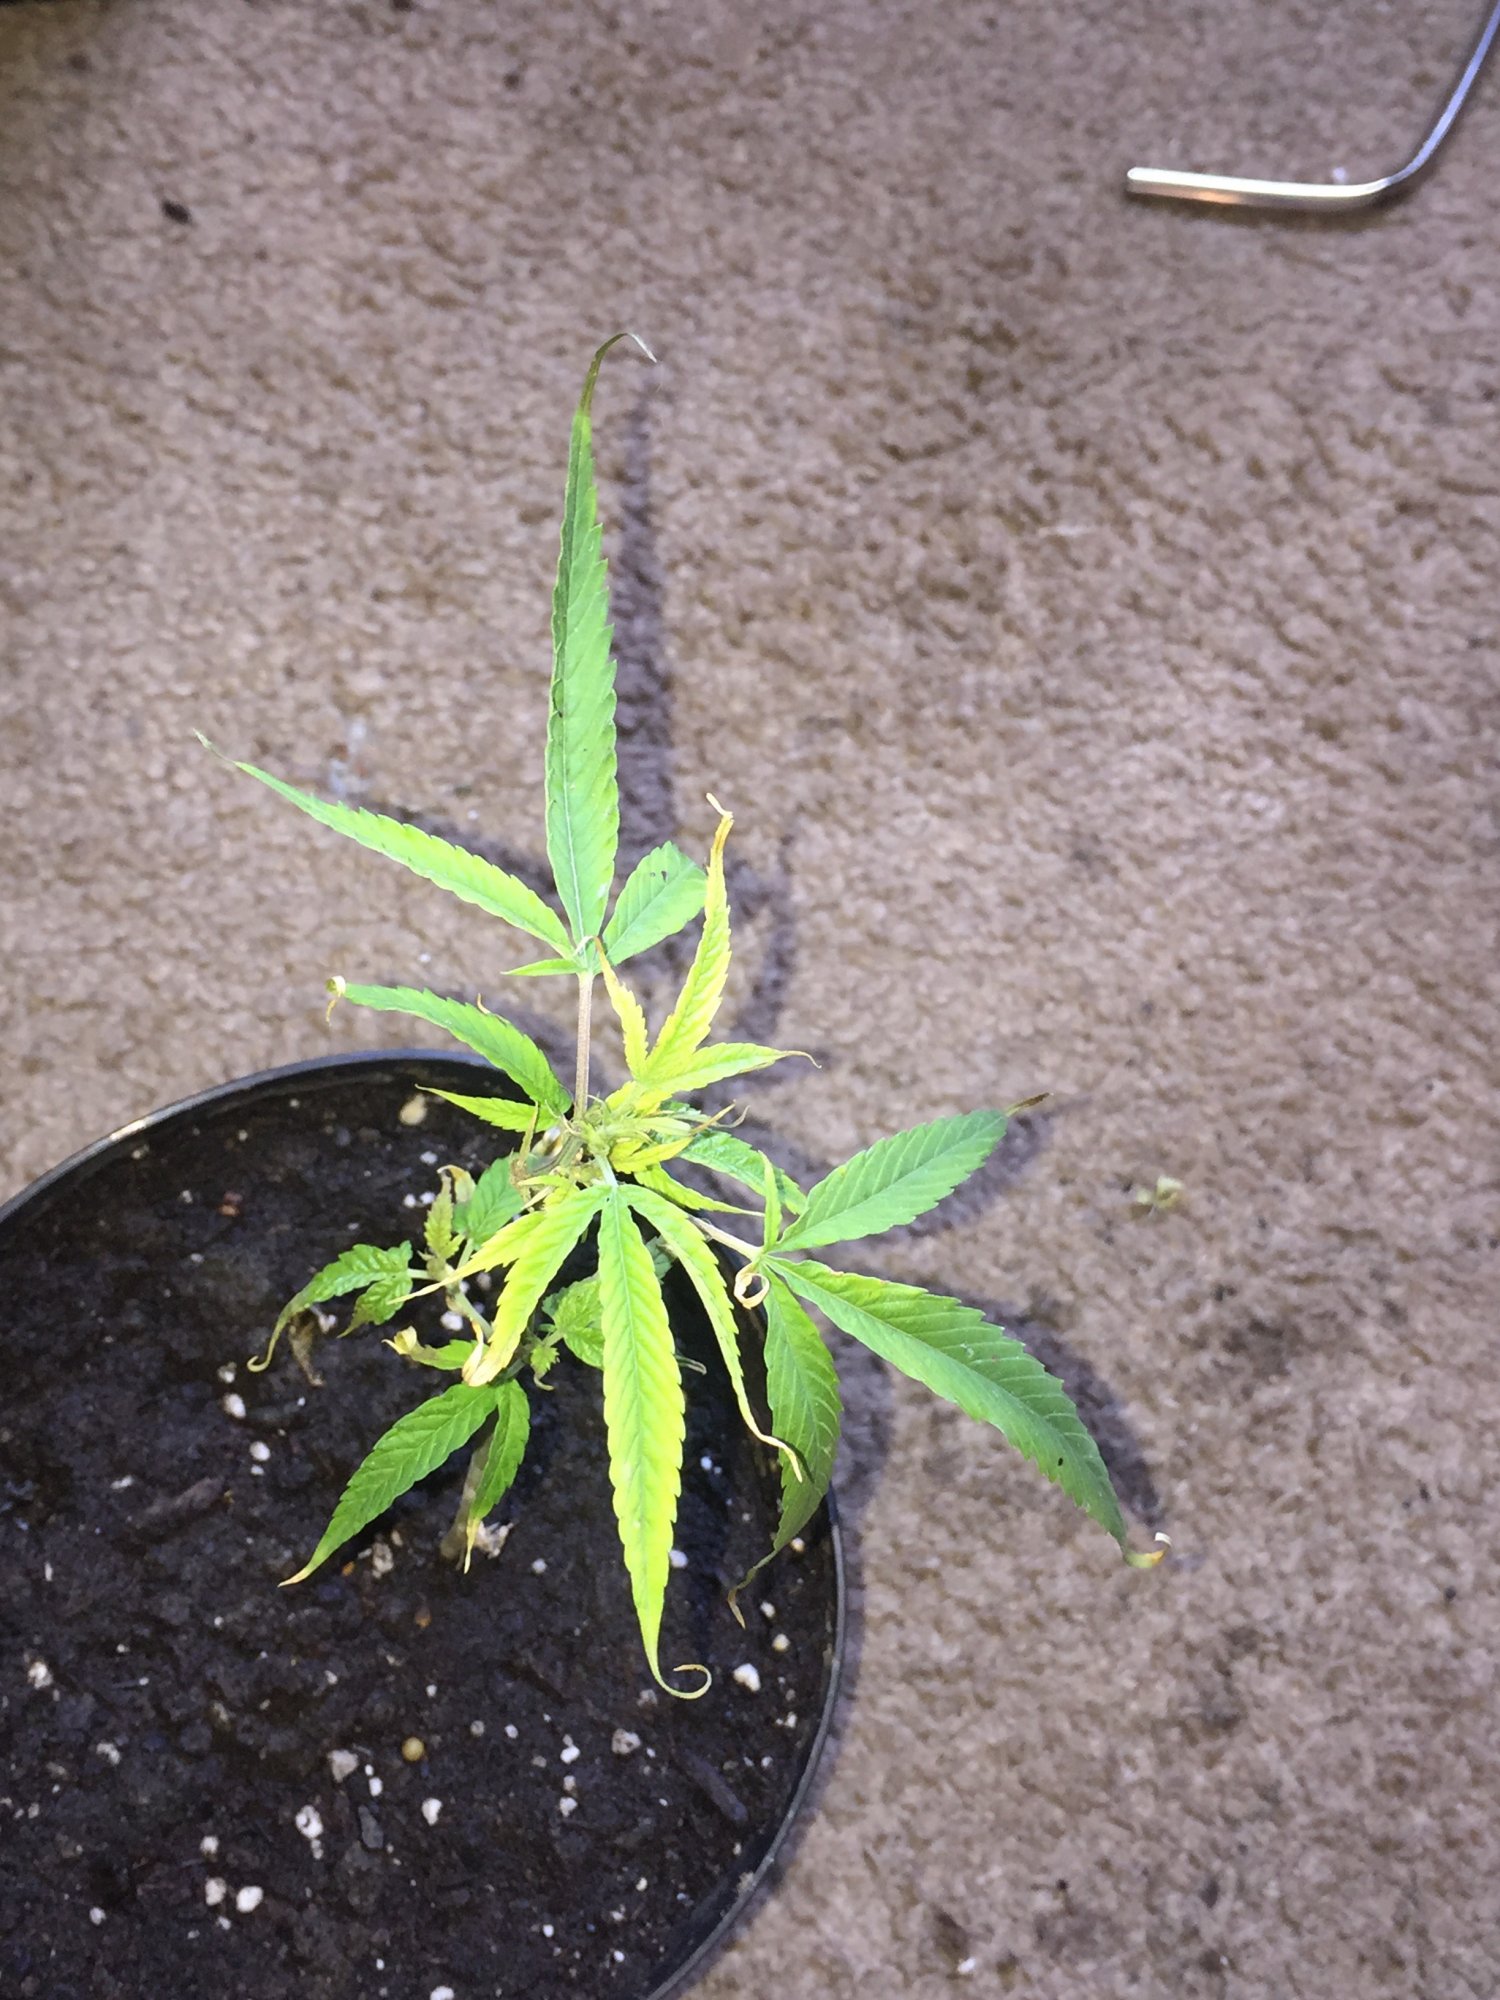 Please give me advice about my clones that are dying 4